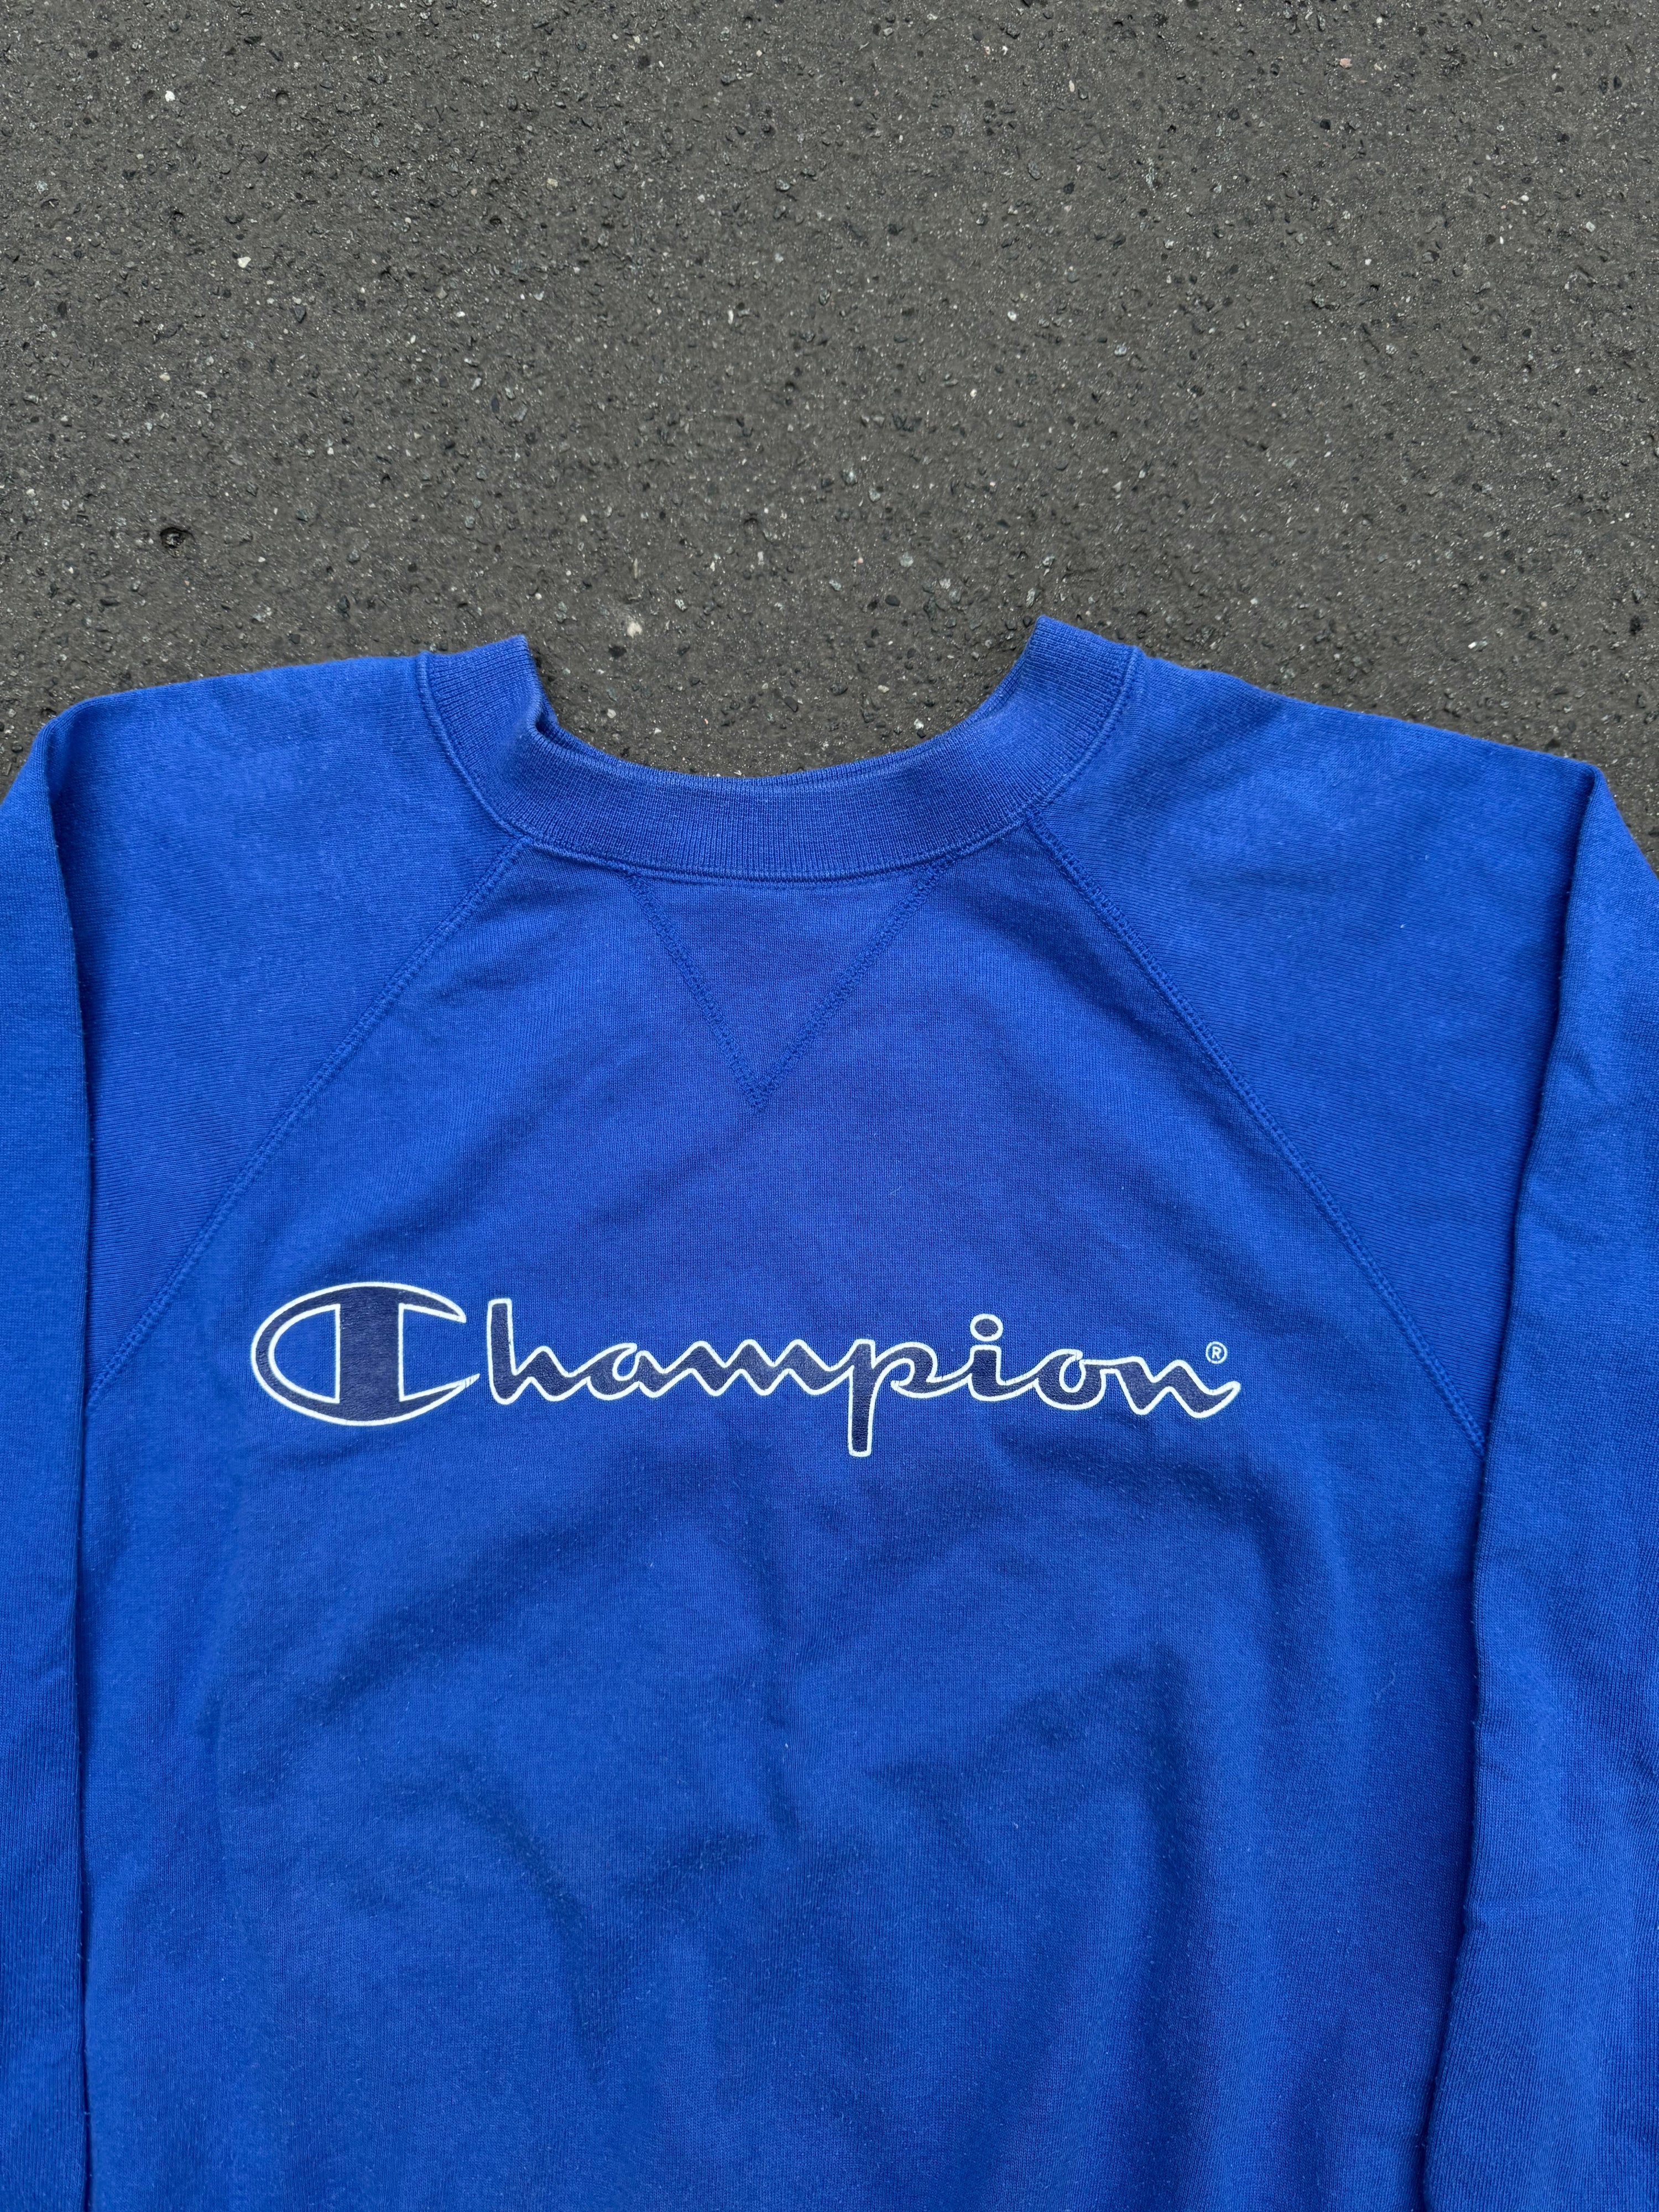 Vintage Champion Logo Made in the USA Sweater (M)